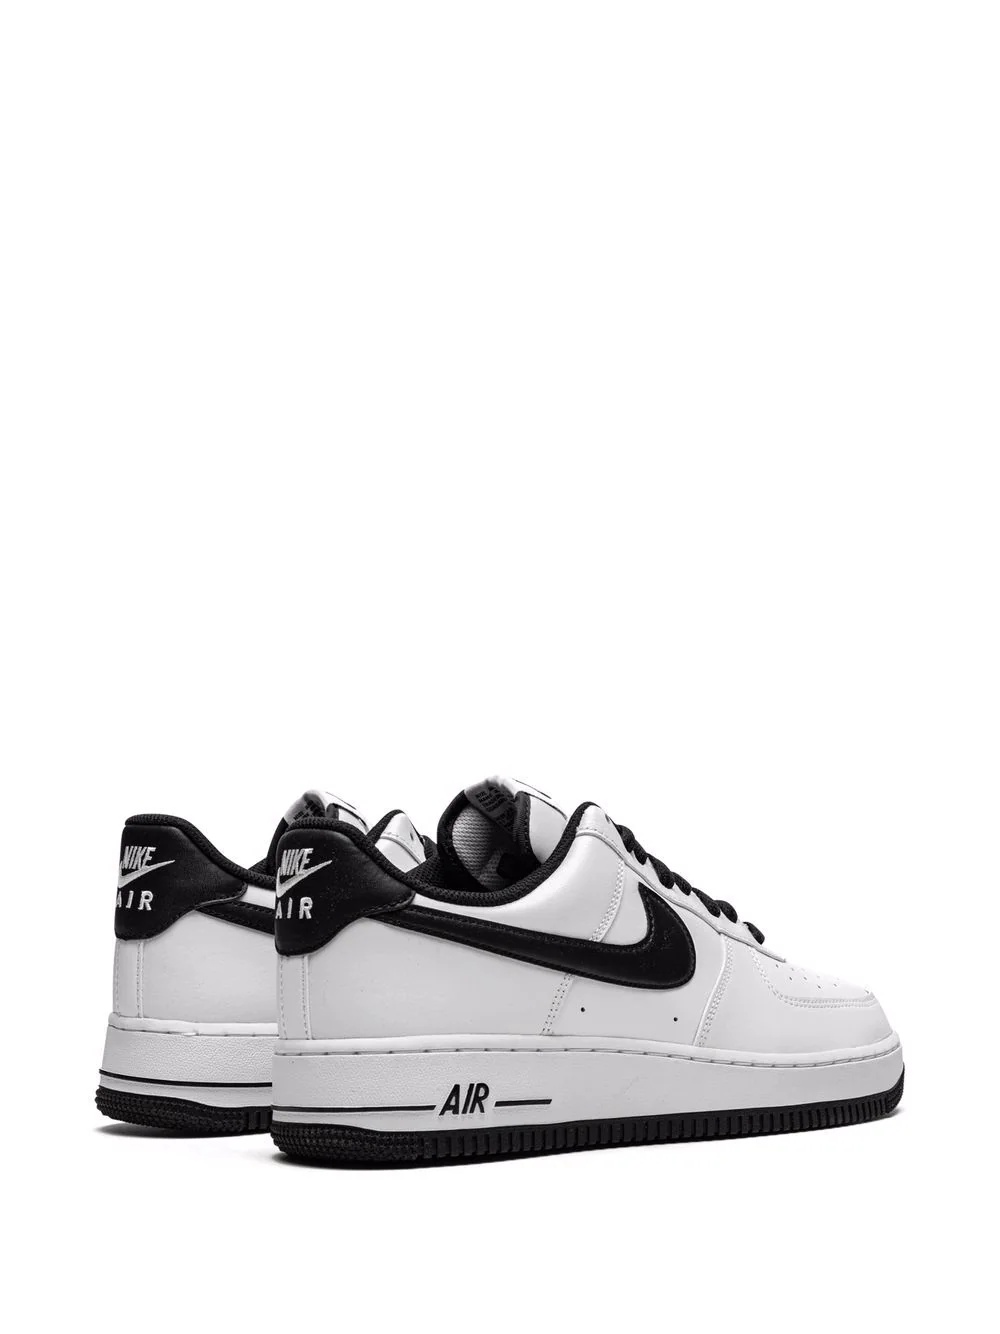 Air Force 1 '07 "White/Black" sneakers - 3